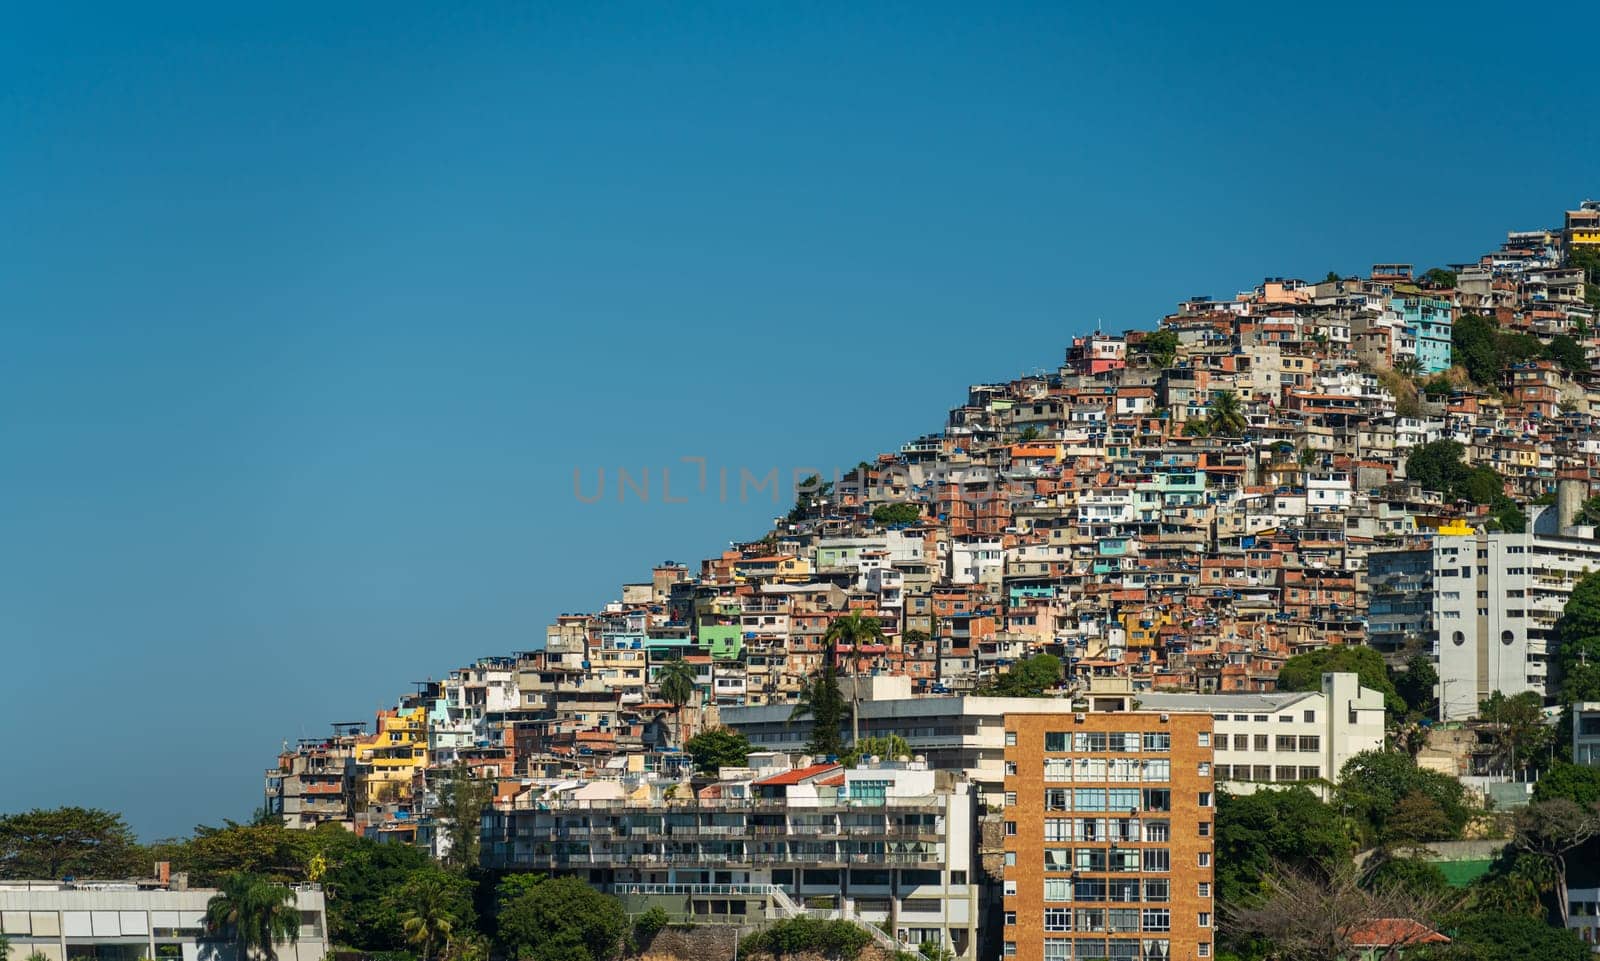 A vivid favela on a hill contrasts with nearby modern homes on a sunny day.